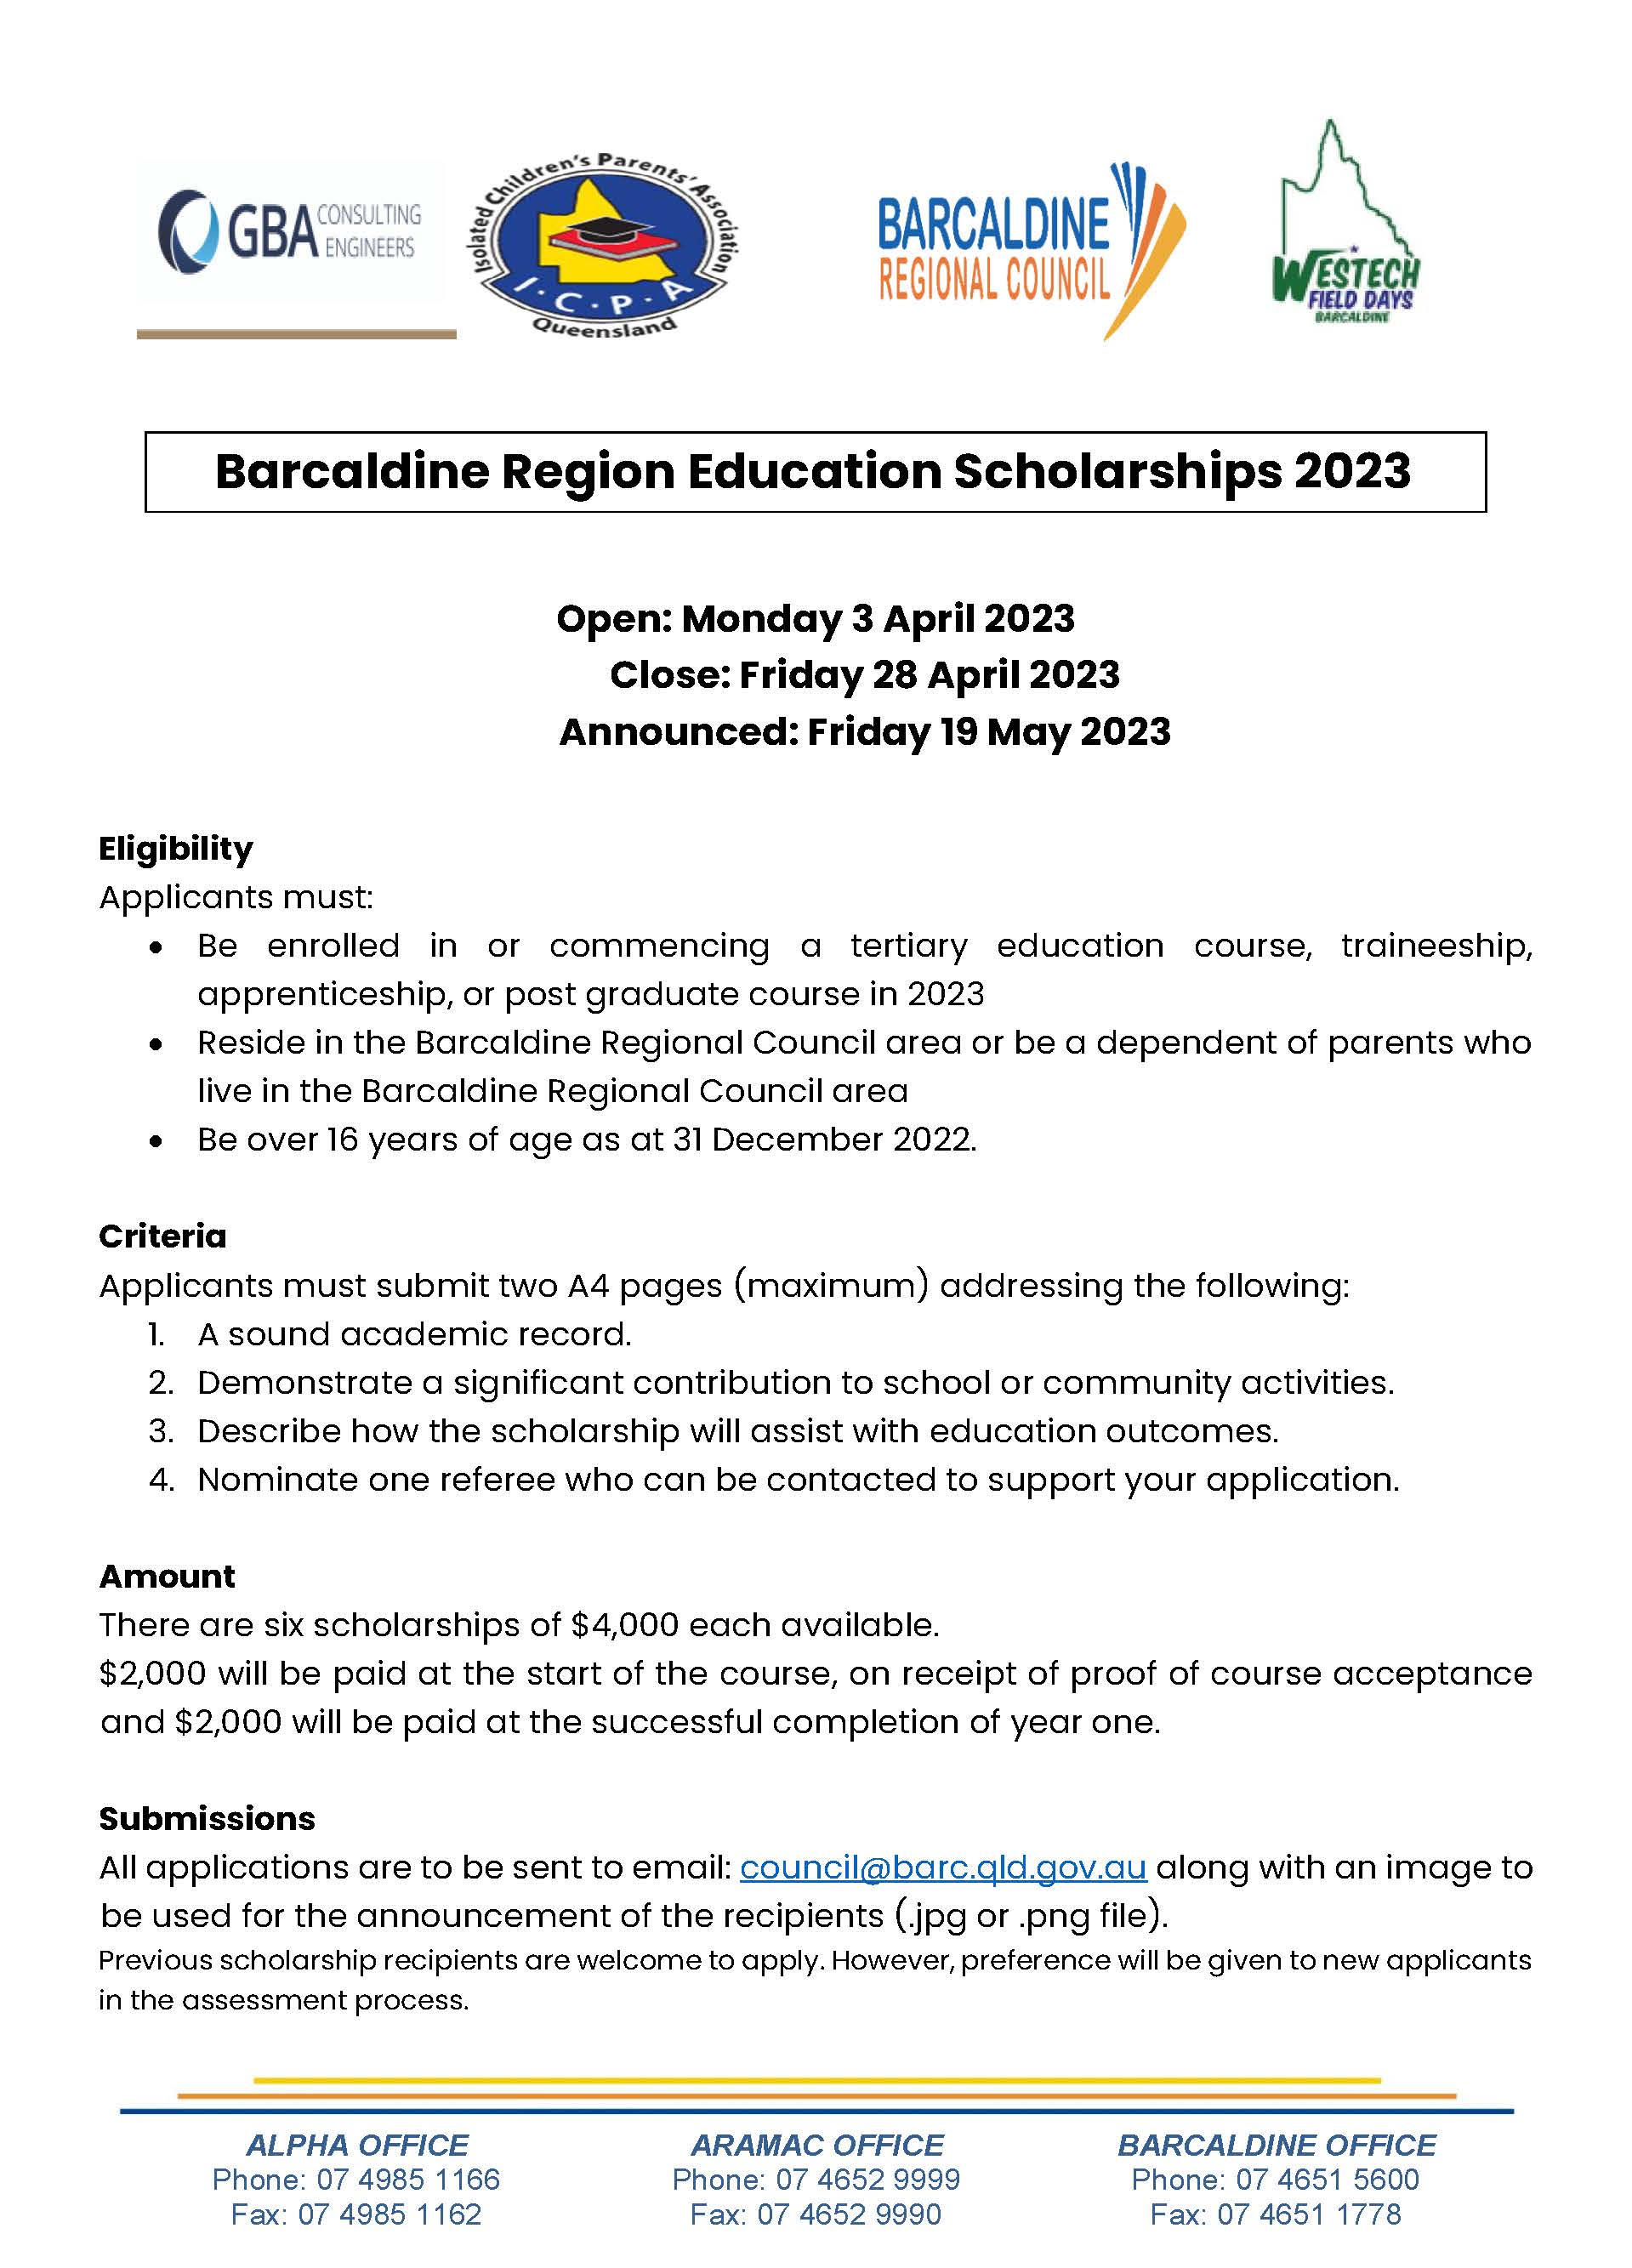 Applications are open for the Barcaldine Region Education Scholarships 2023